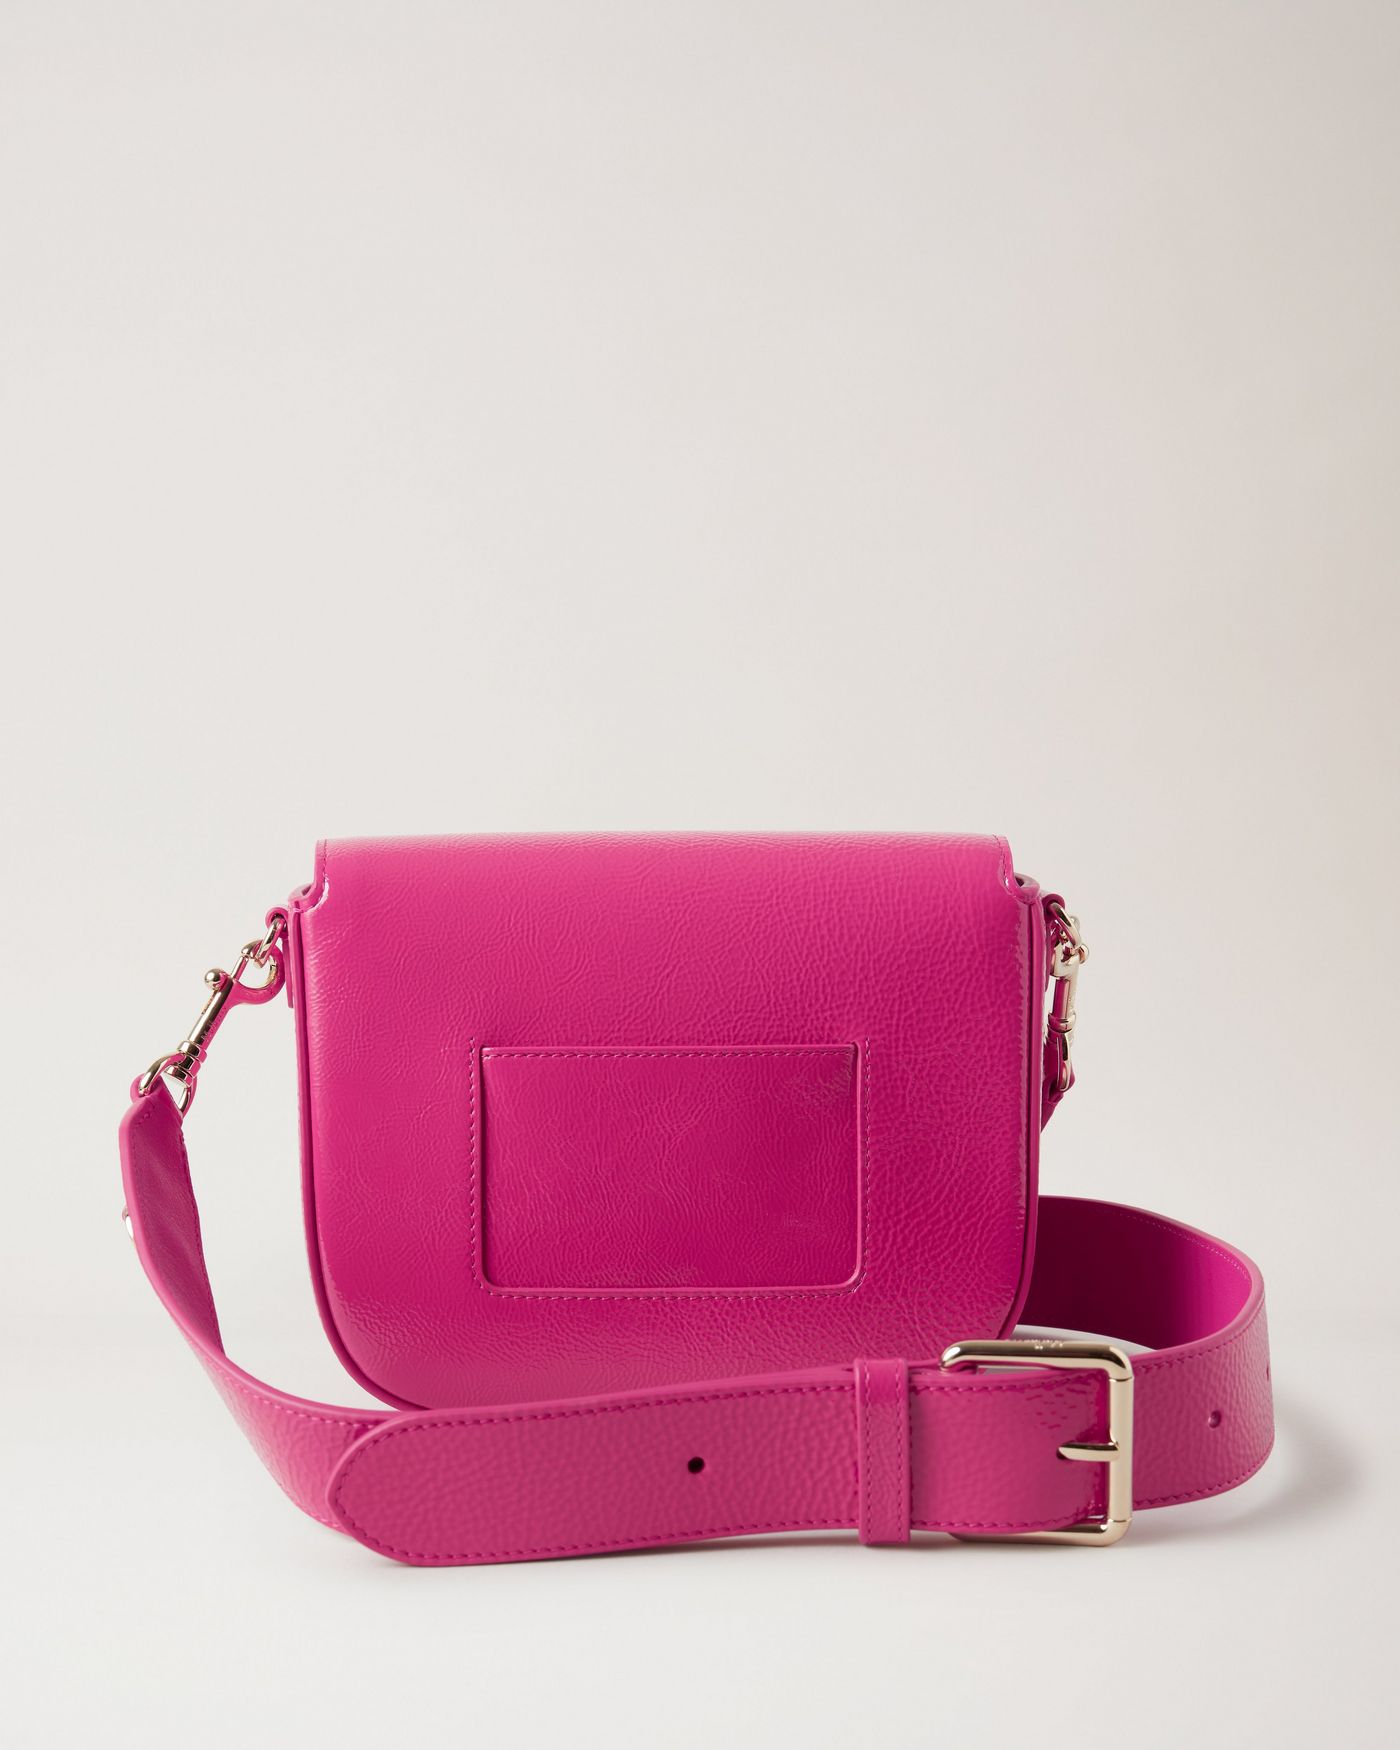 Small Darley Satchel | Mulberry Pink Spongy Patent | Darley | Mulberry